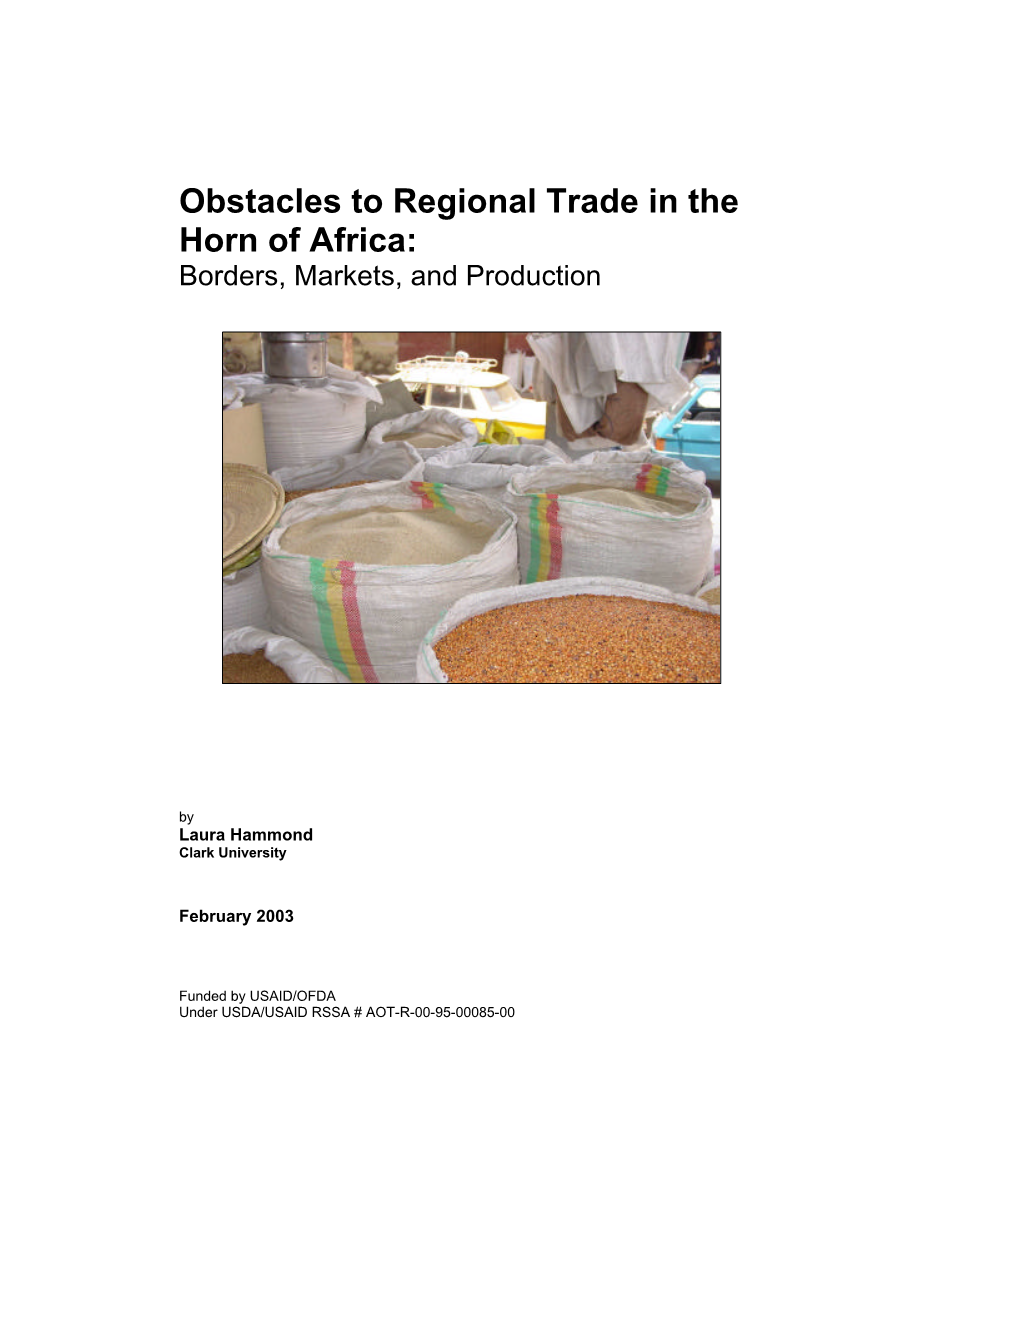 Obstacles to Regional Trade in the Horn of Africa: Borders, Markets, and Production